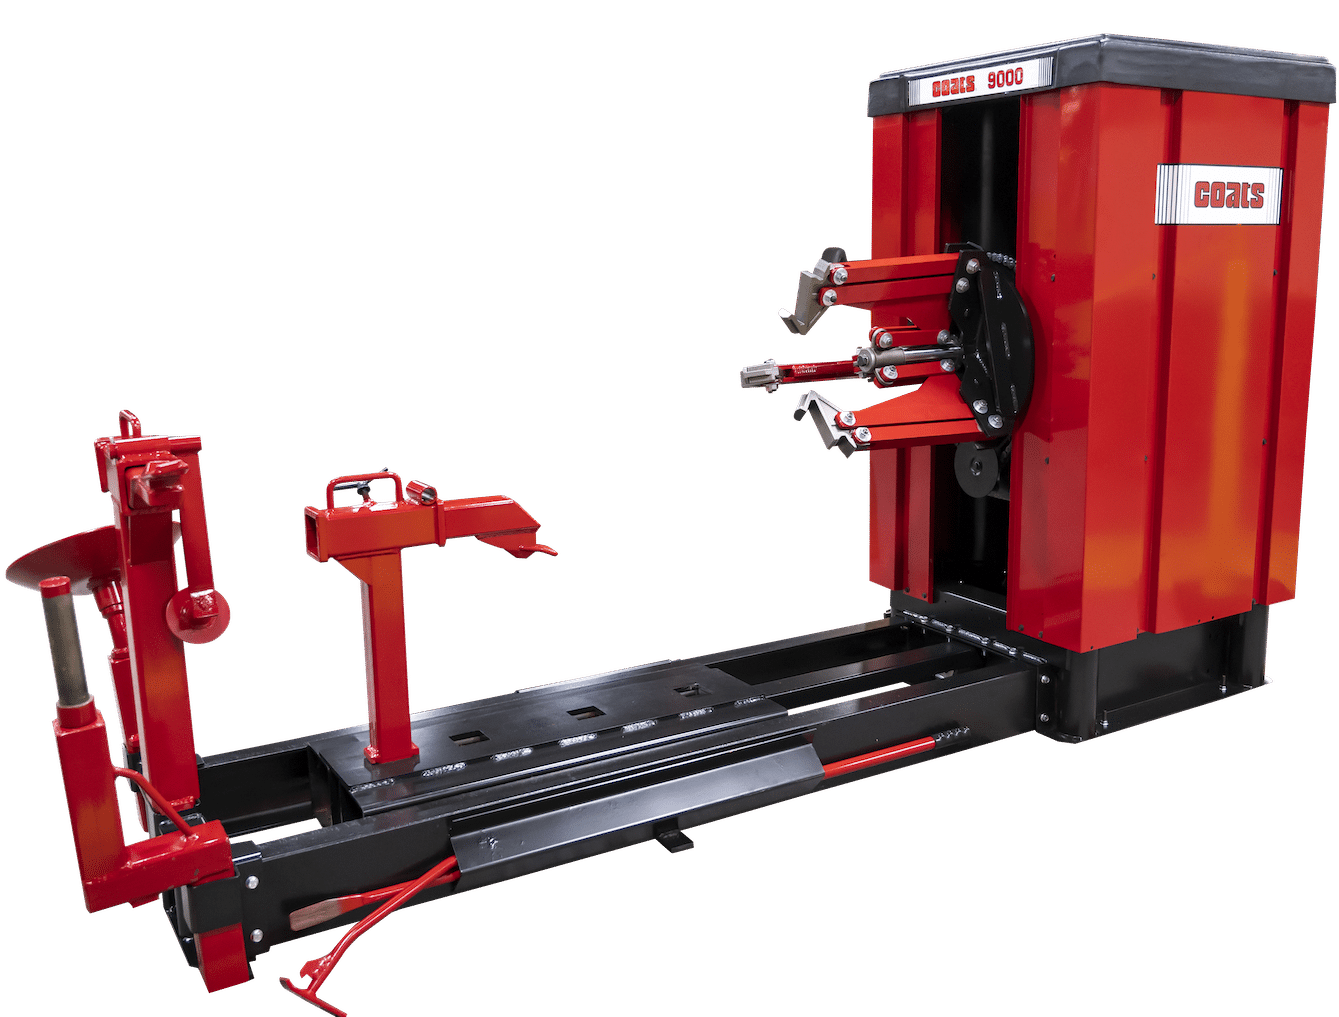 Red heavy duty tire changer with a large clamping chuck and levers in front of the chuck